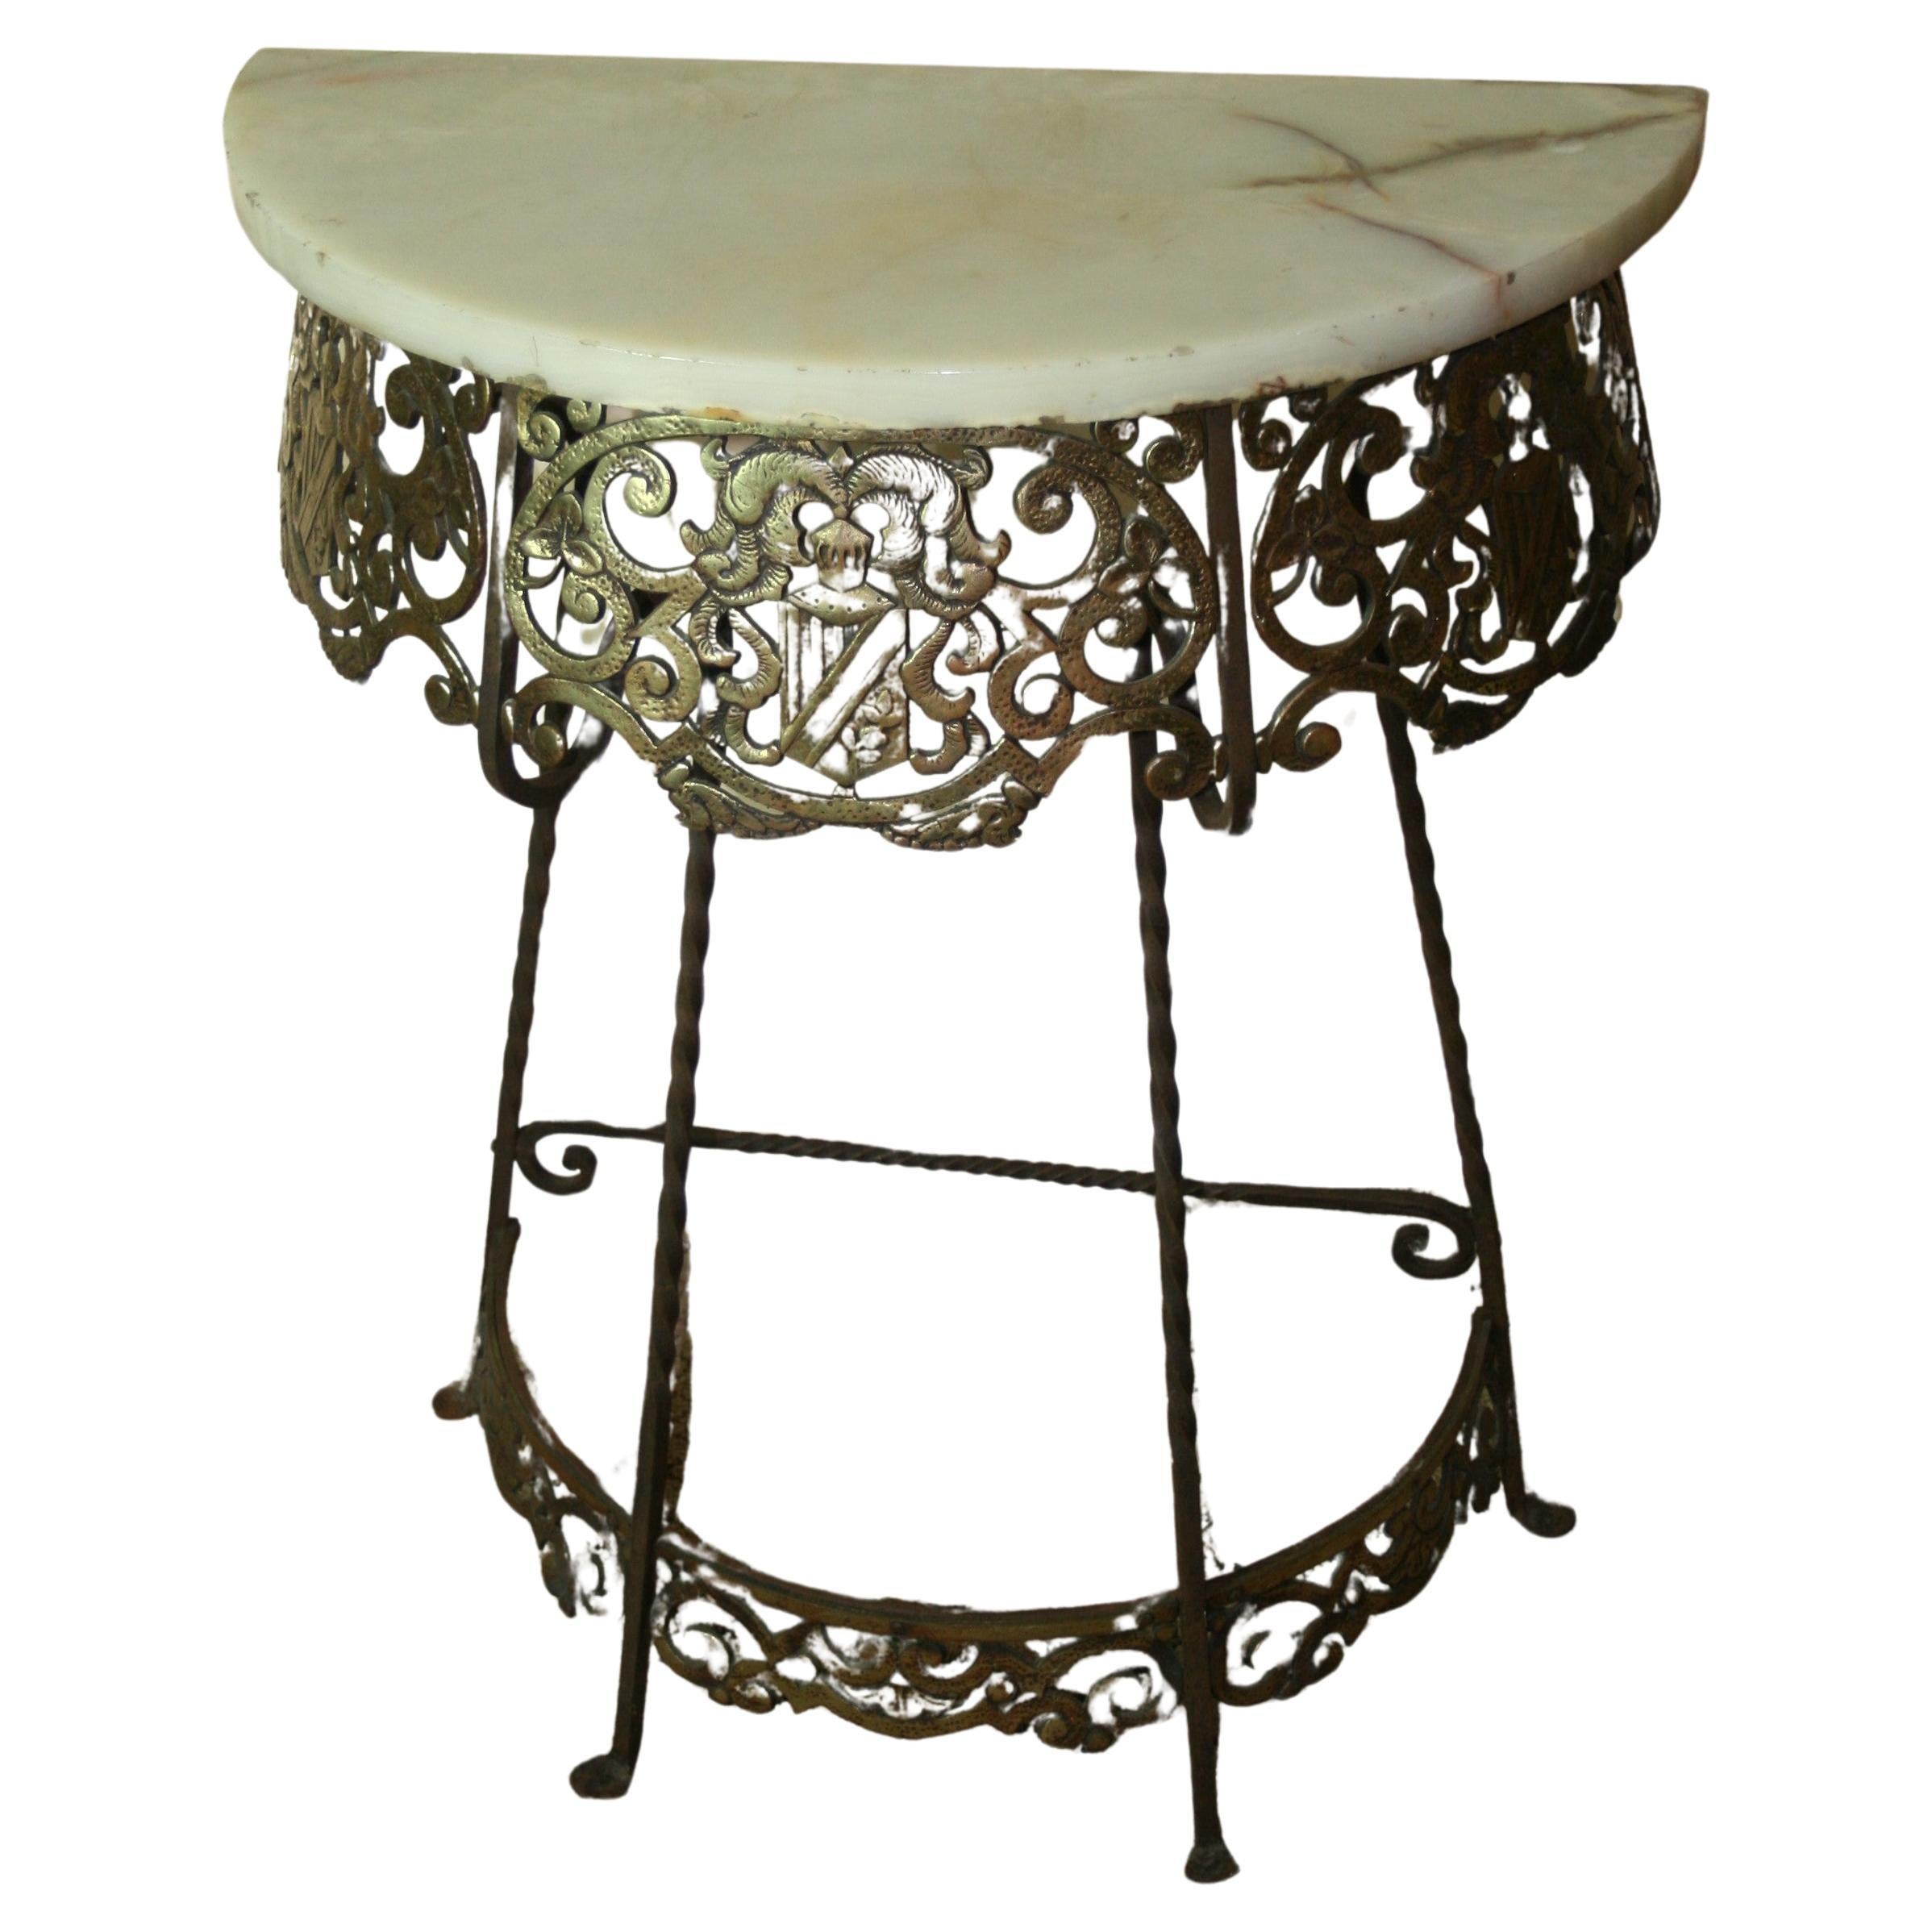 Antique Iron and Brass Heraldry Demi lune Console with Onyx Top